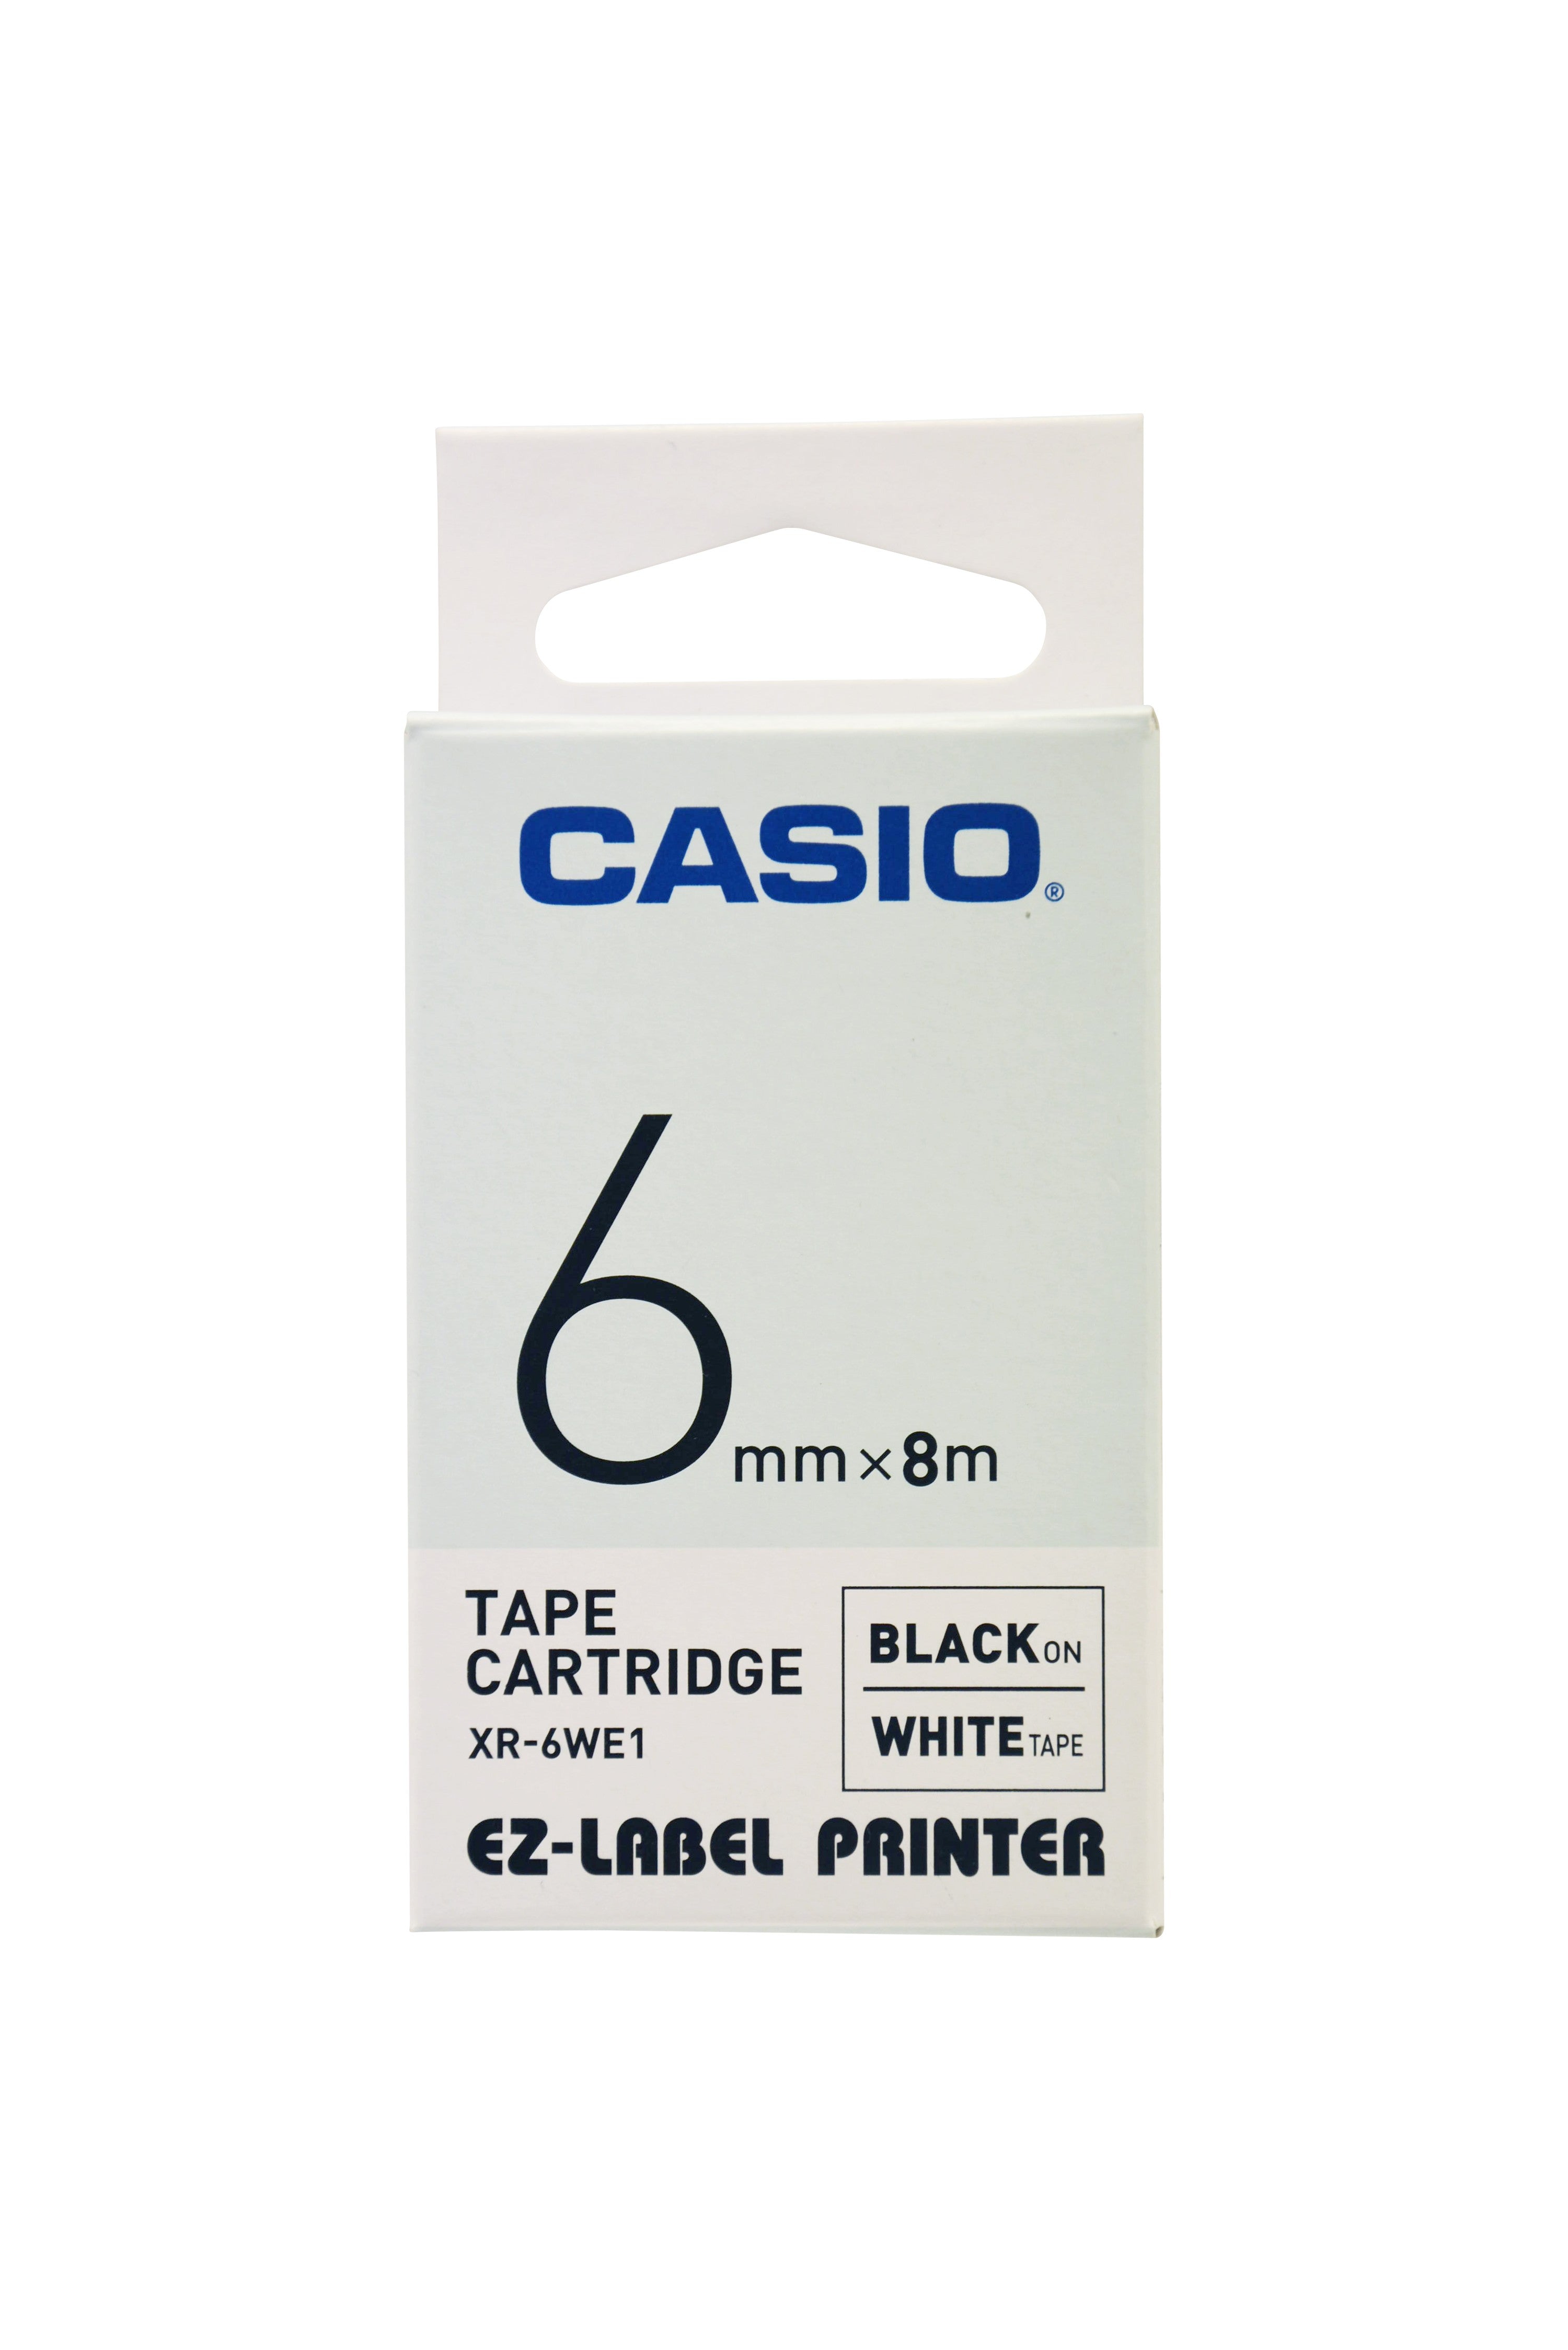 Casio 6mm Black on White Labeling Tape  XR-6WE1 for Casio KL-820 label printer